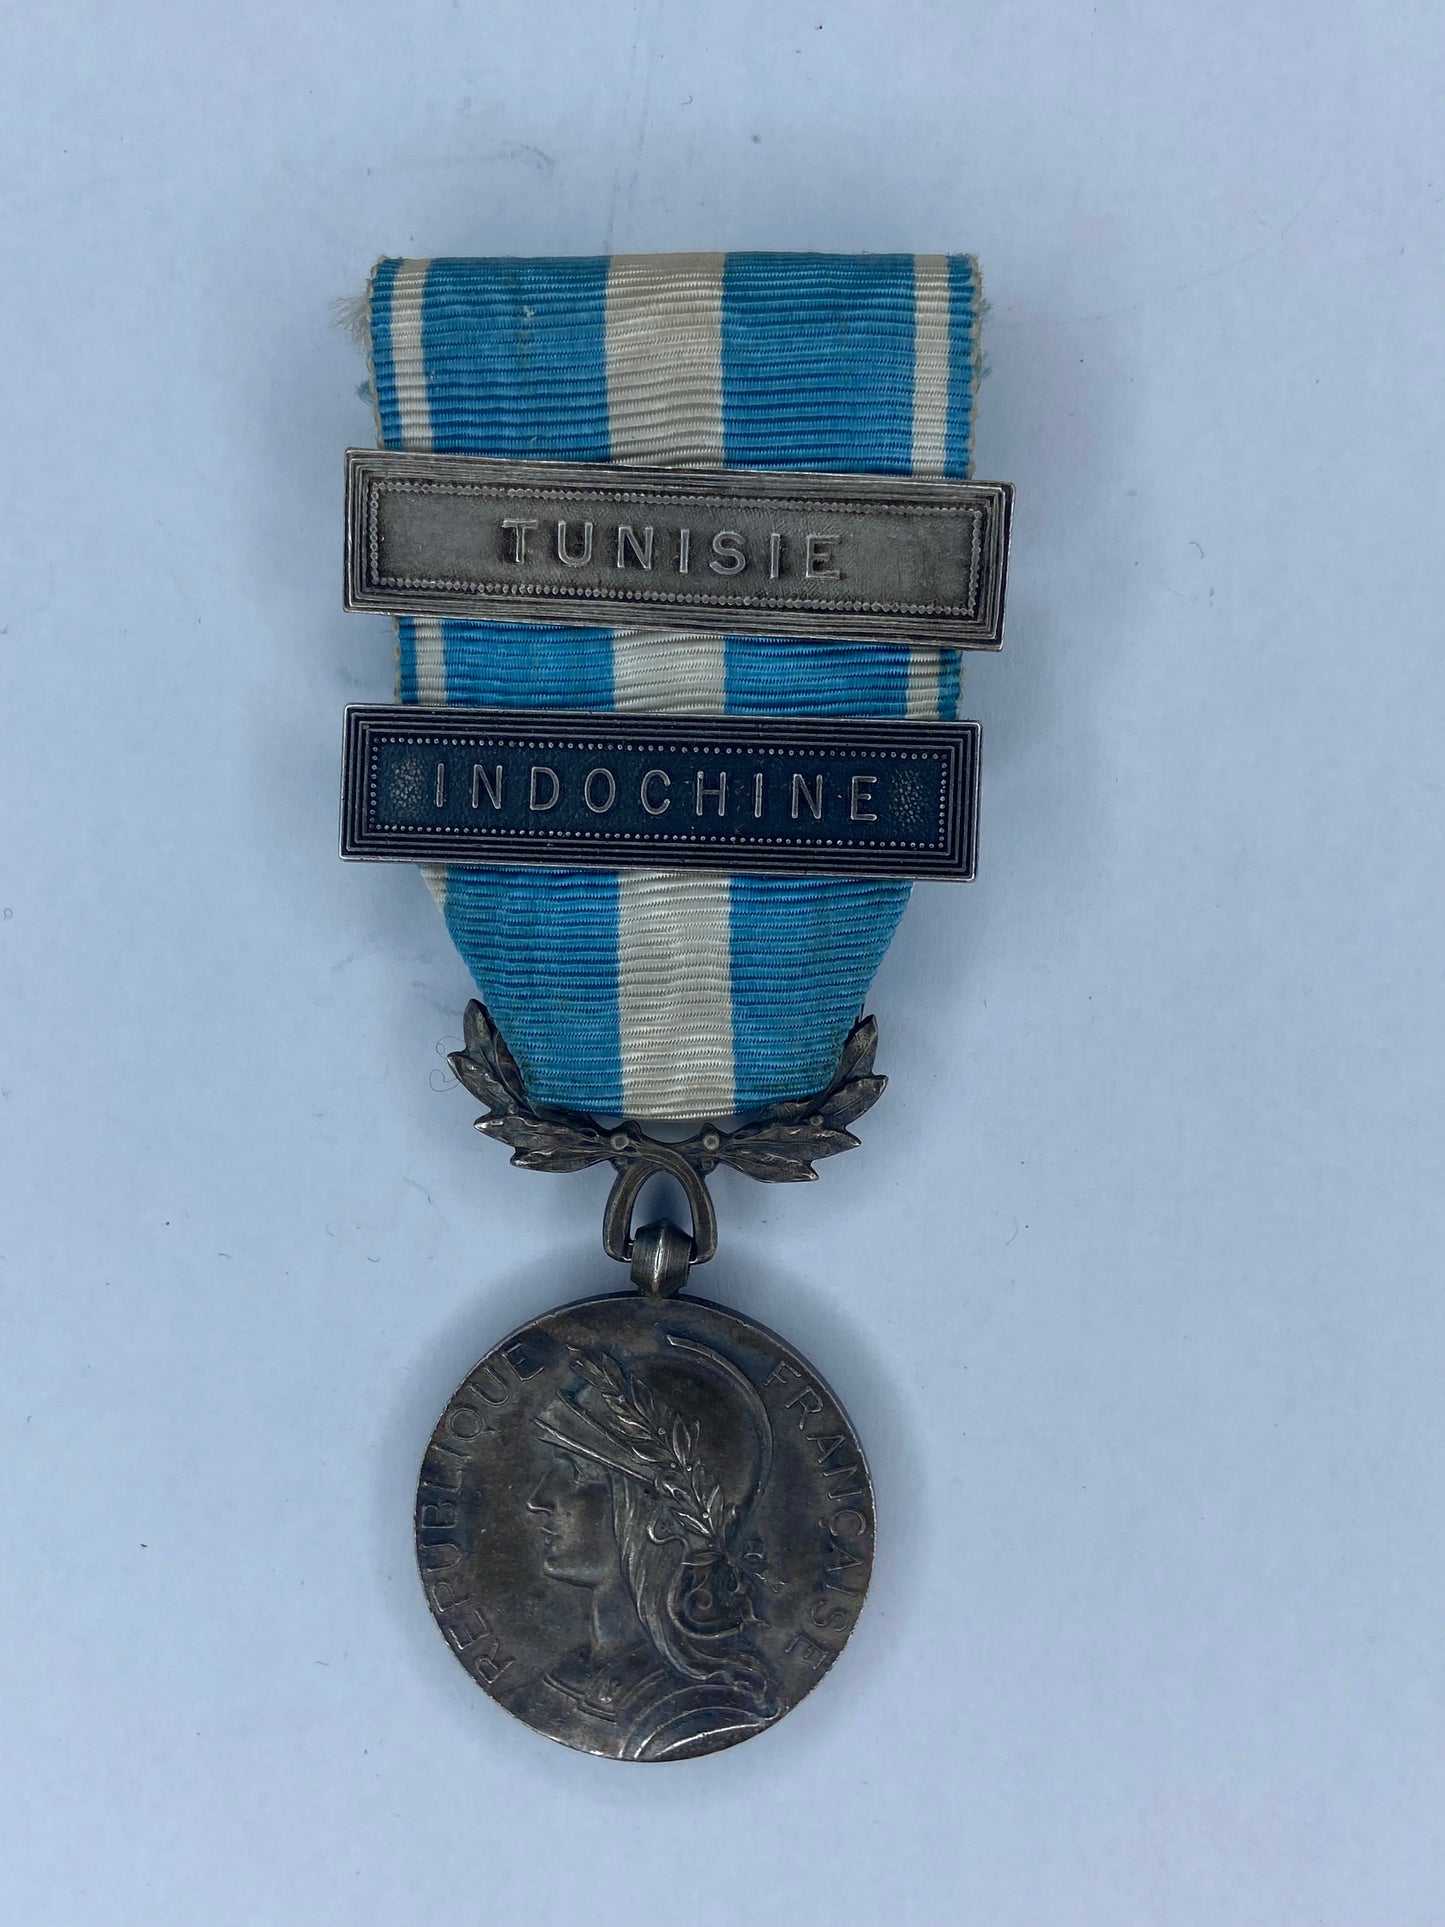 FRANCE COLONIAL MEDAL WITH 5 BARS. 3 x TUNISIE, INDOCHINE, EXTREME ORIENT. BOXED.